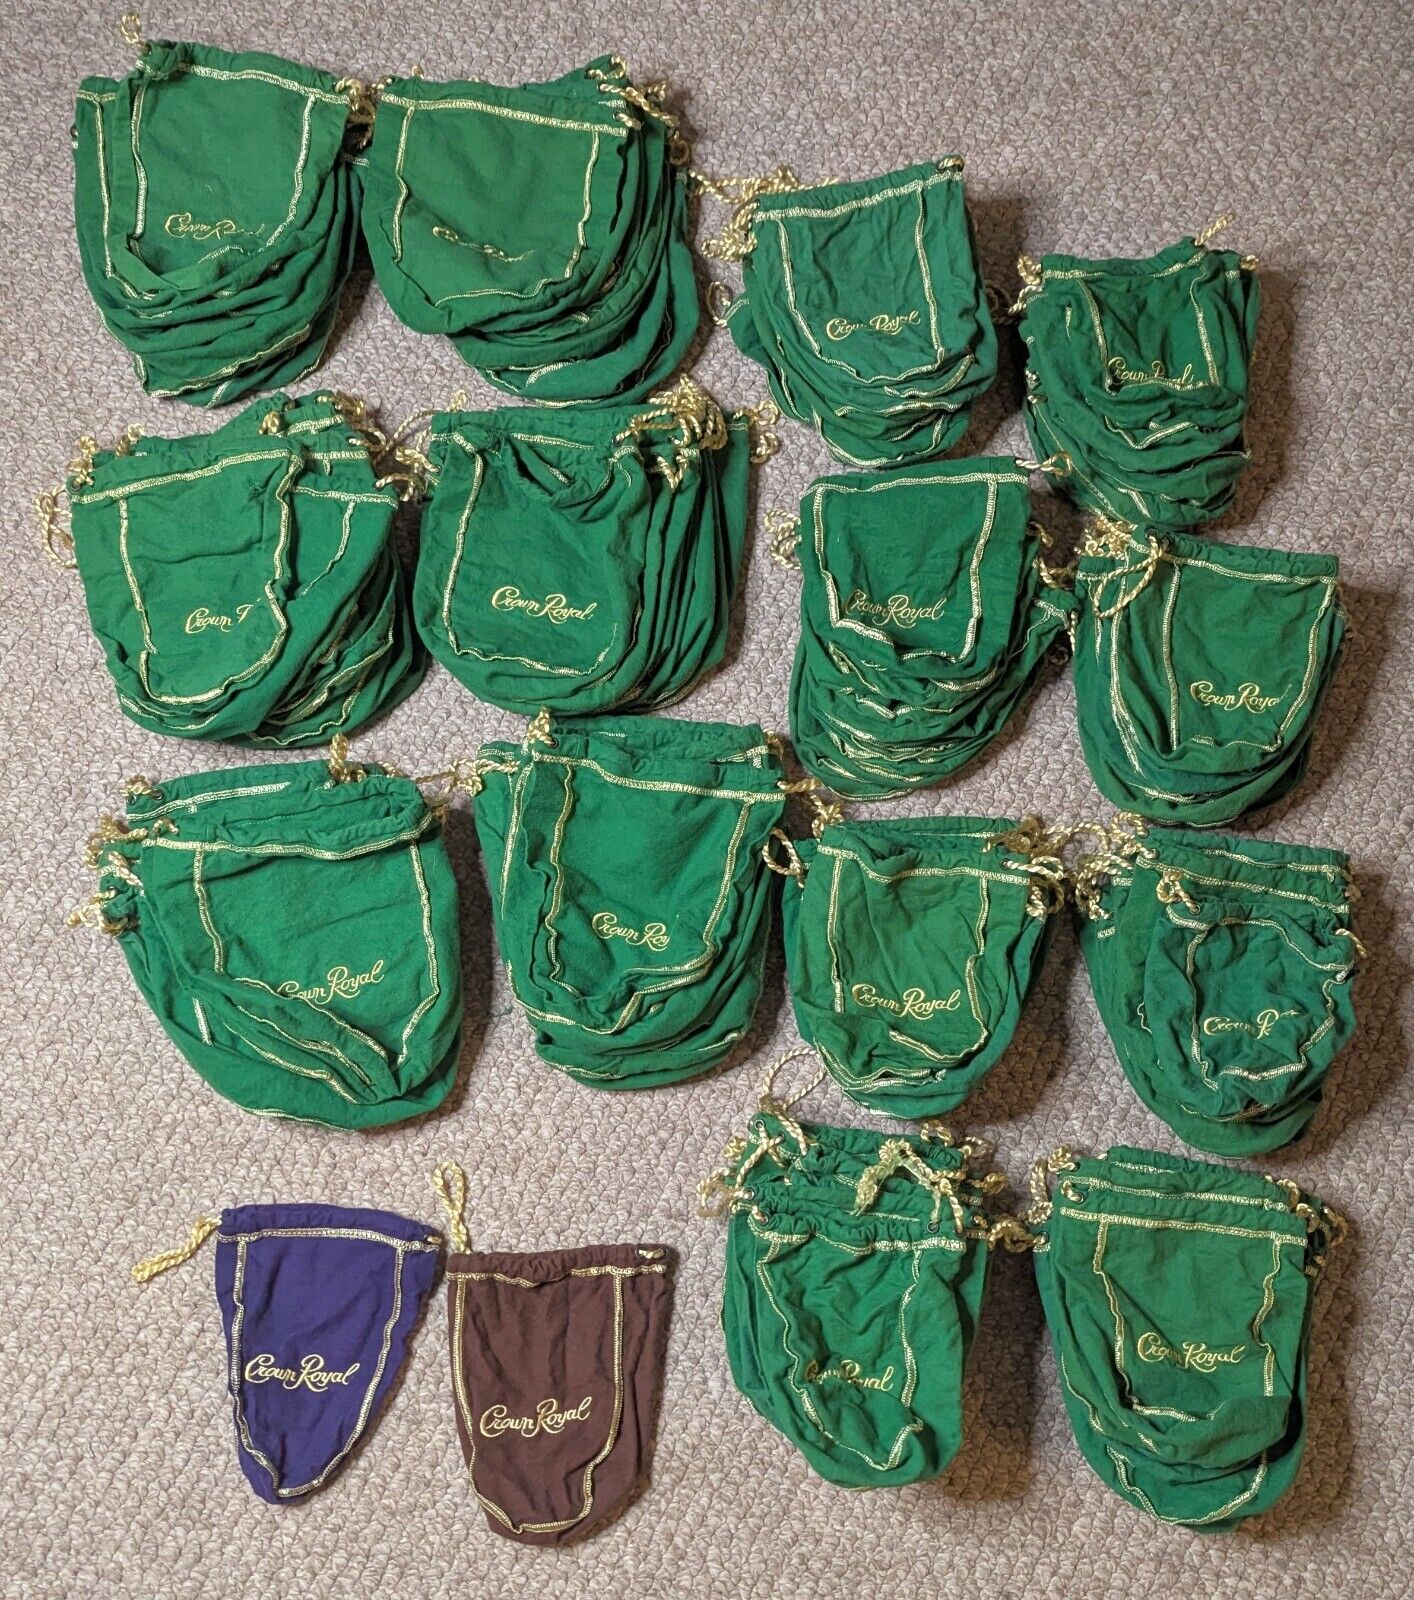 HUGE Lot Of 143 Crown Royal Bags- Assortment Of Colors And Sizes- See Pics/Read